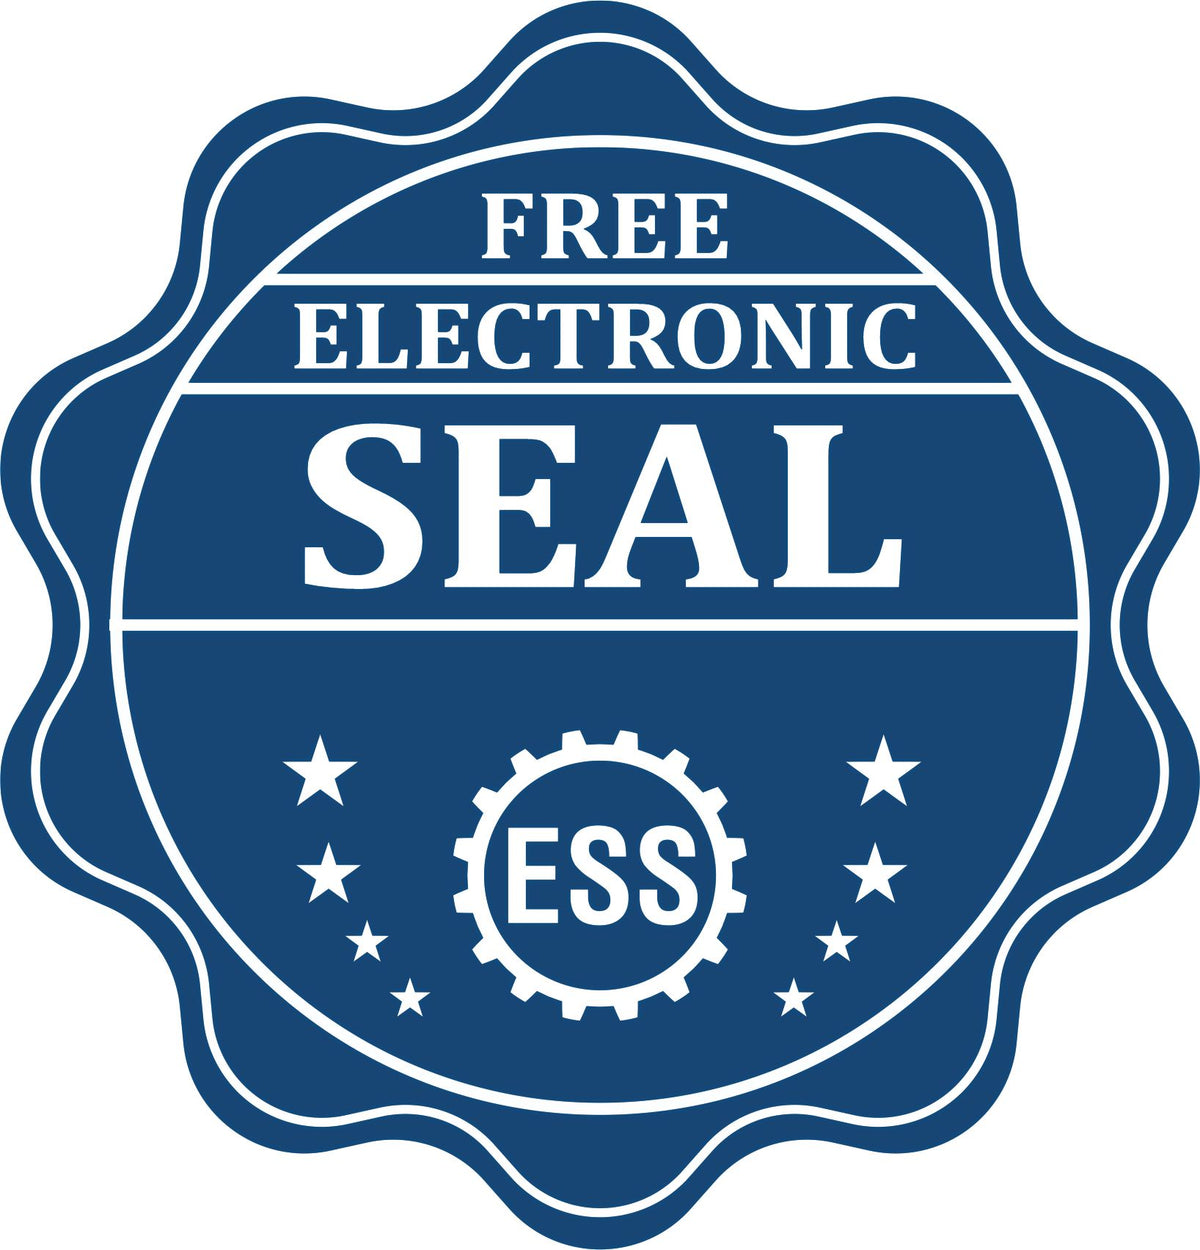 A badge showing a free electronic seal for the Soft Maine Professional Engineer Seal with stars and the ESS gear on the emblem.